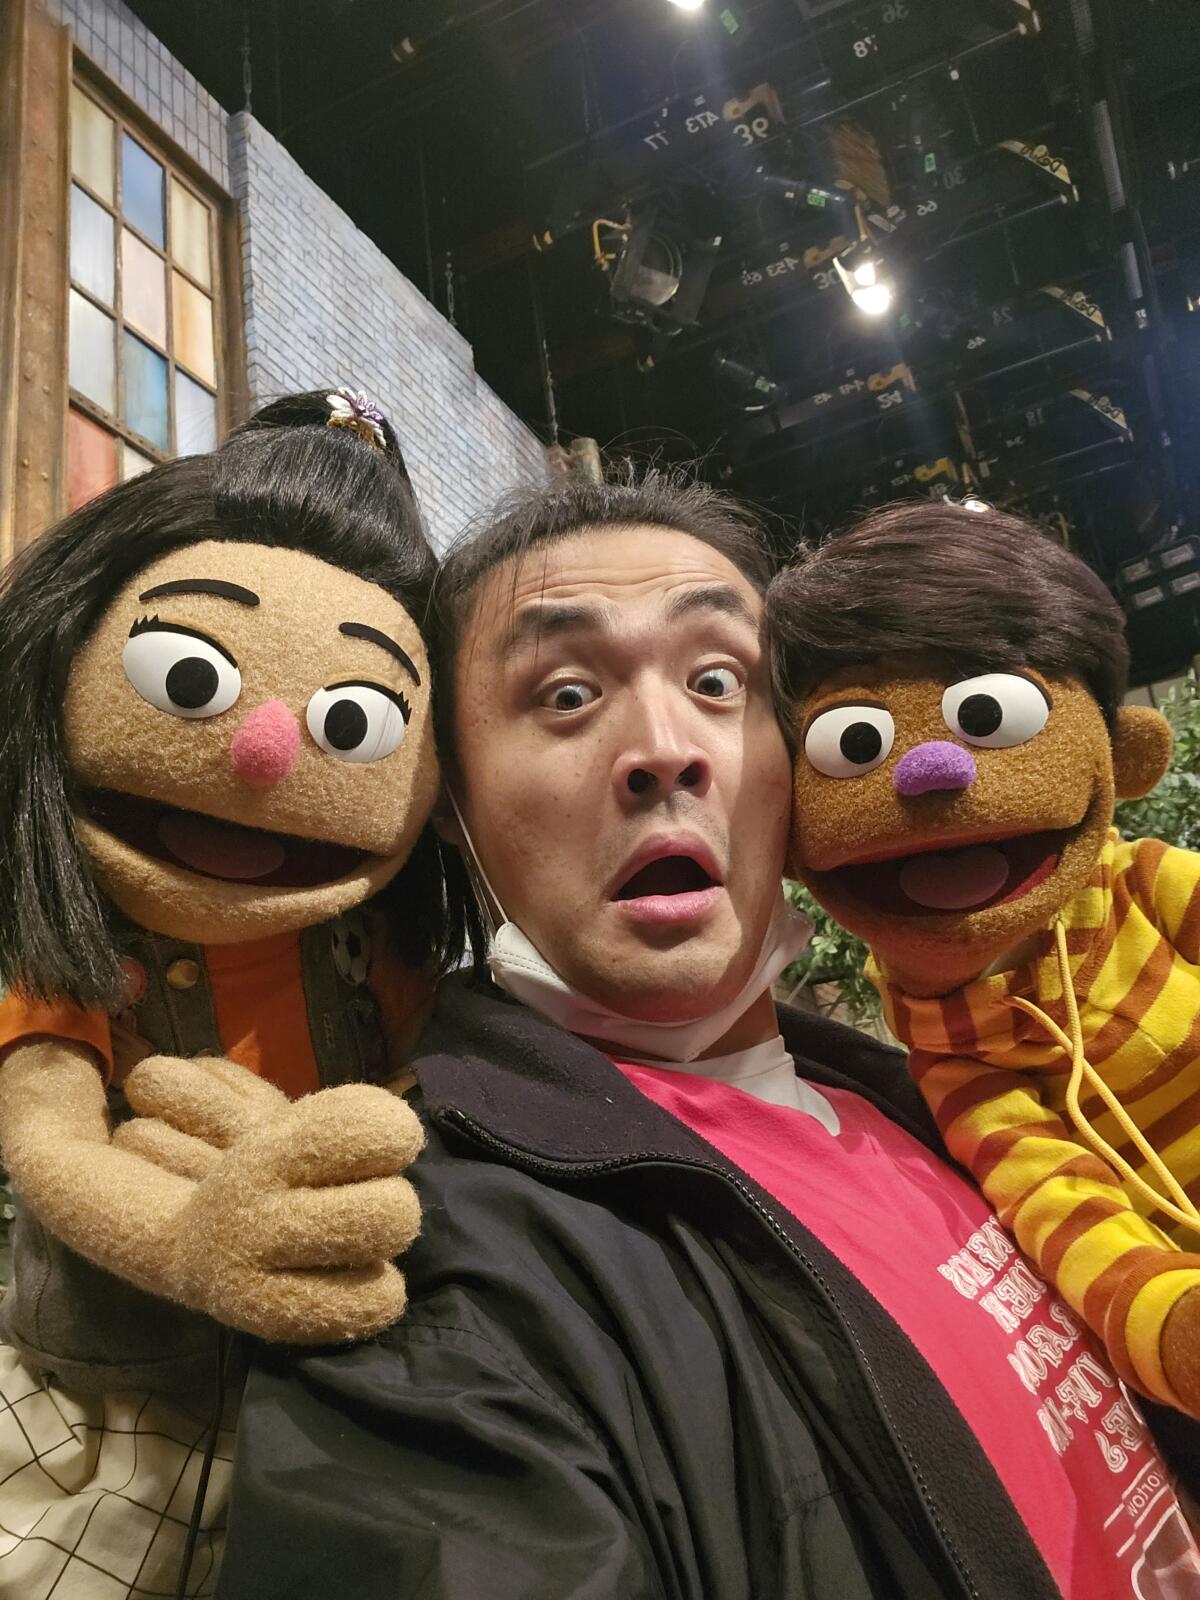 A man poses with two Muppets on set.